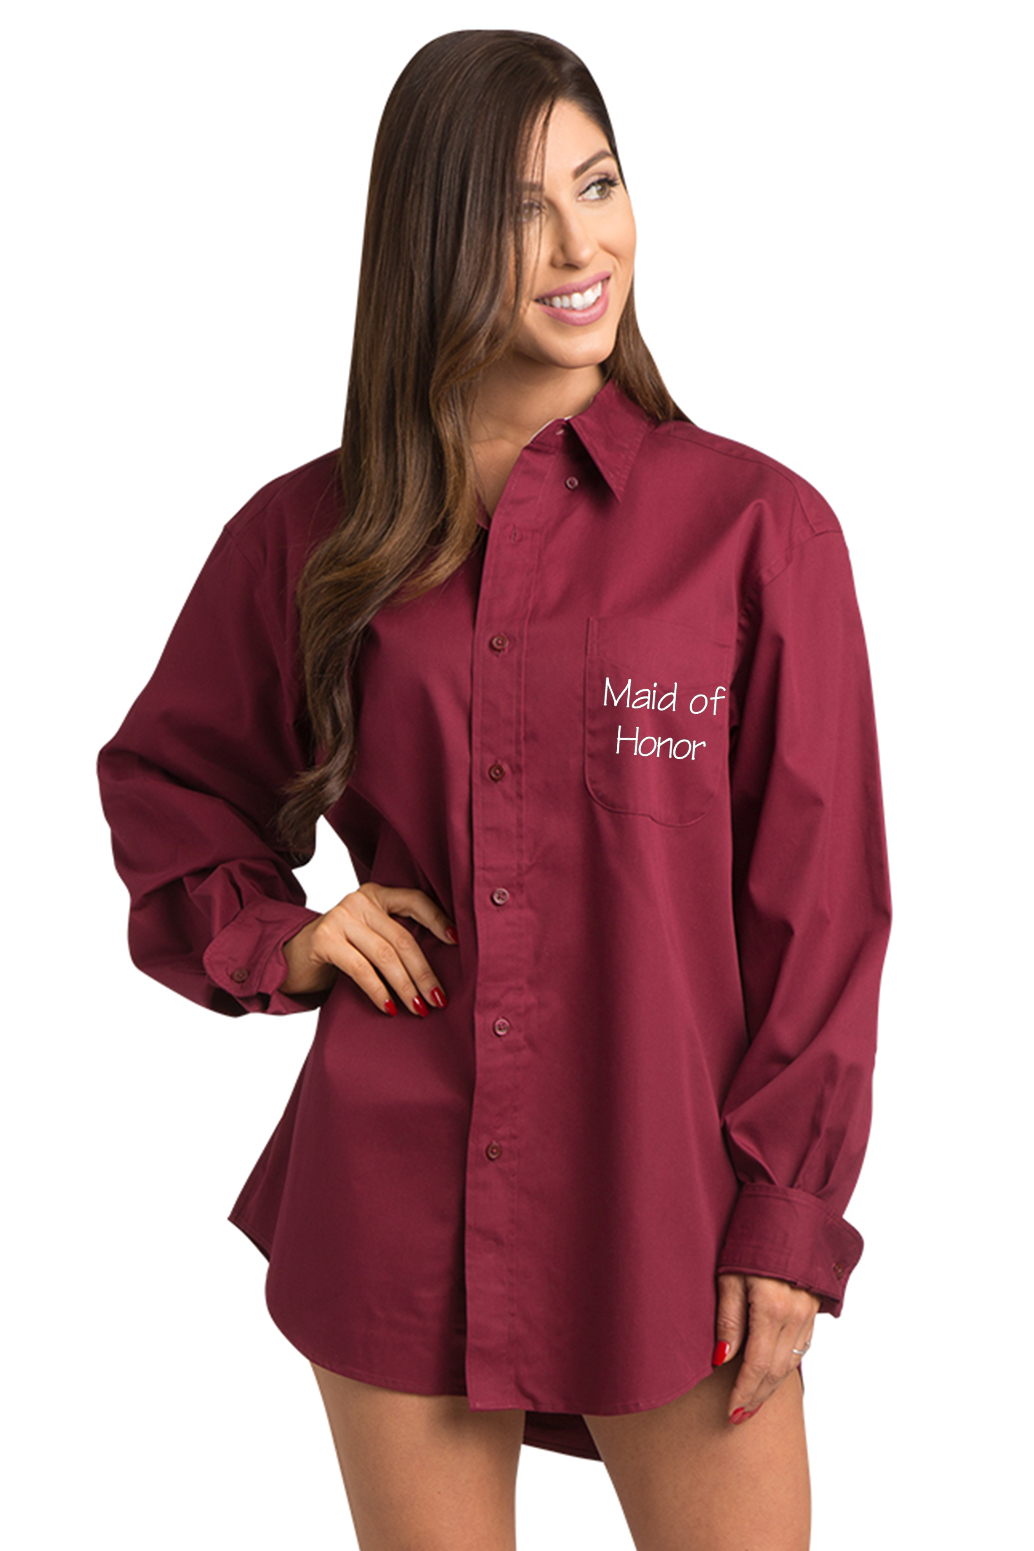 Zynotti Embroidered Maid of Honor Button Down Oxford Shirt